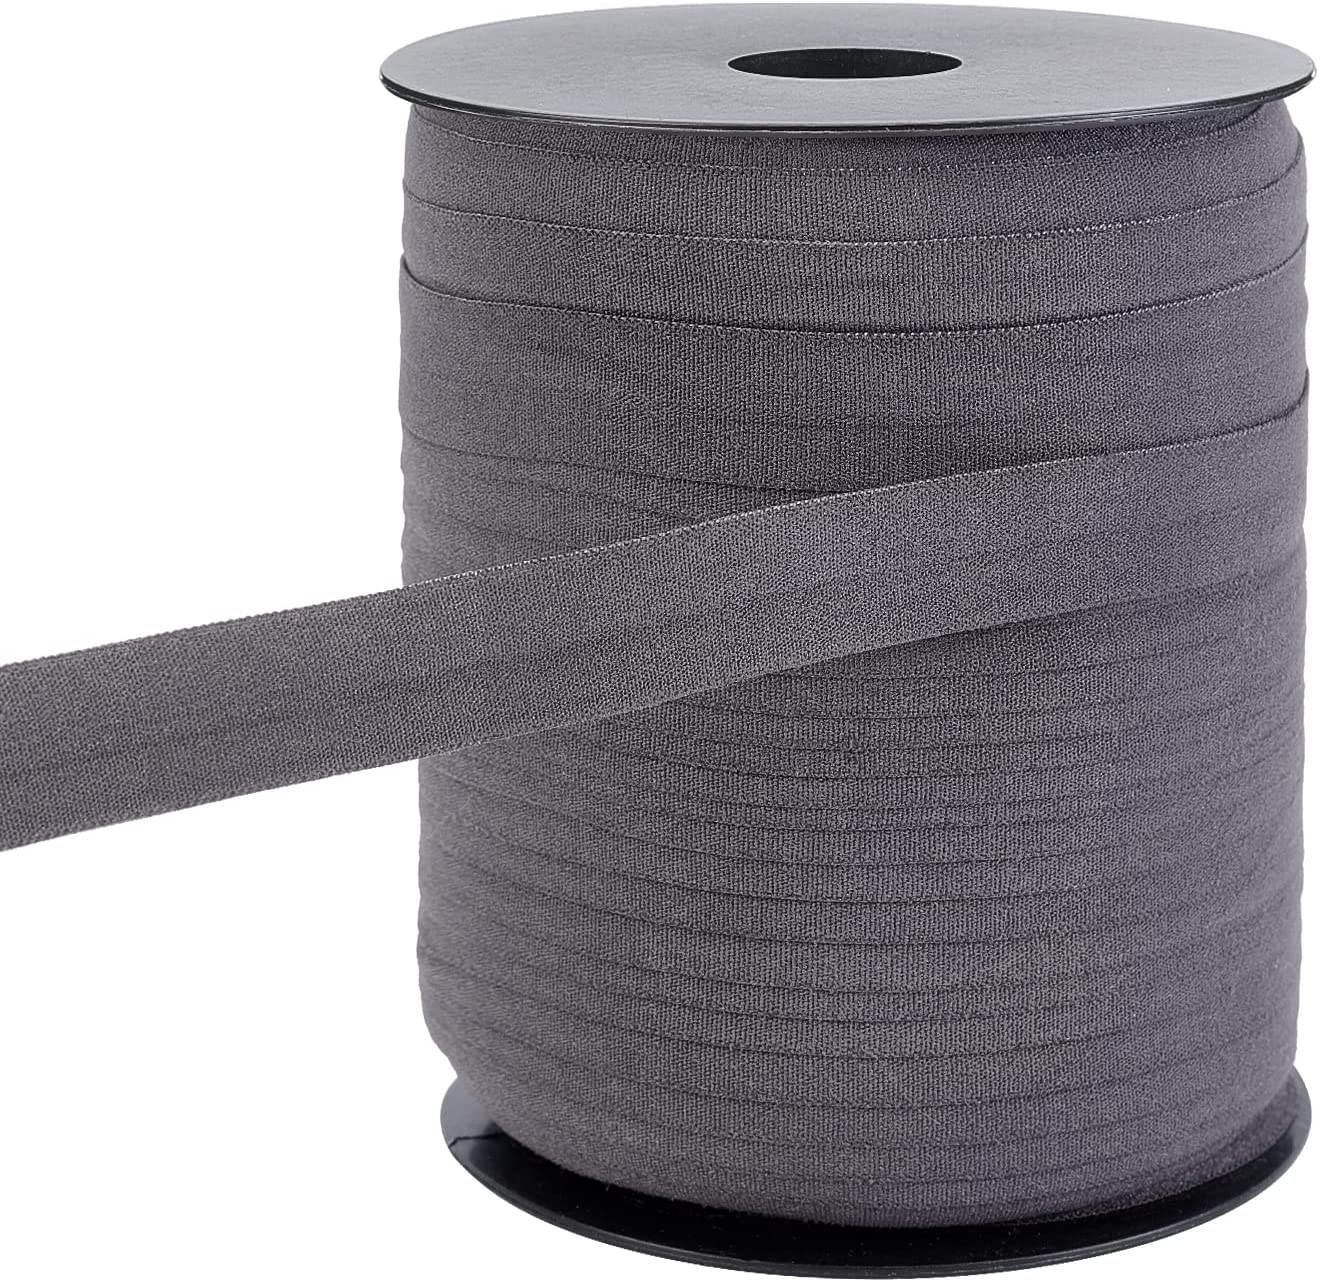 Wide Elastic Band For Sewing And Rubber Thread Stock Photo